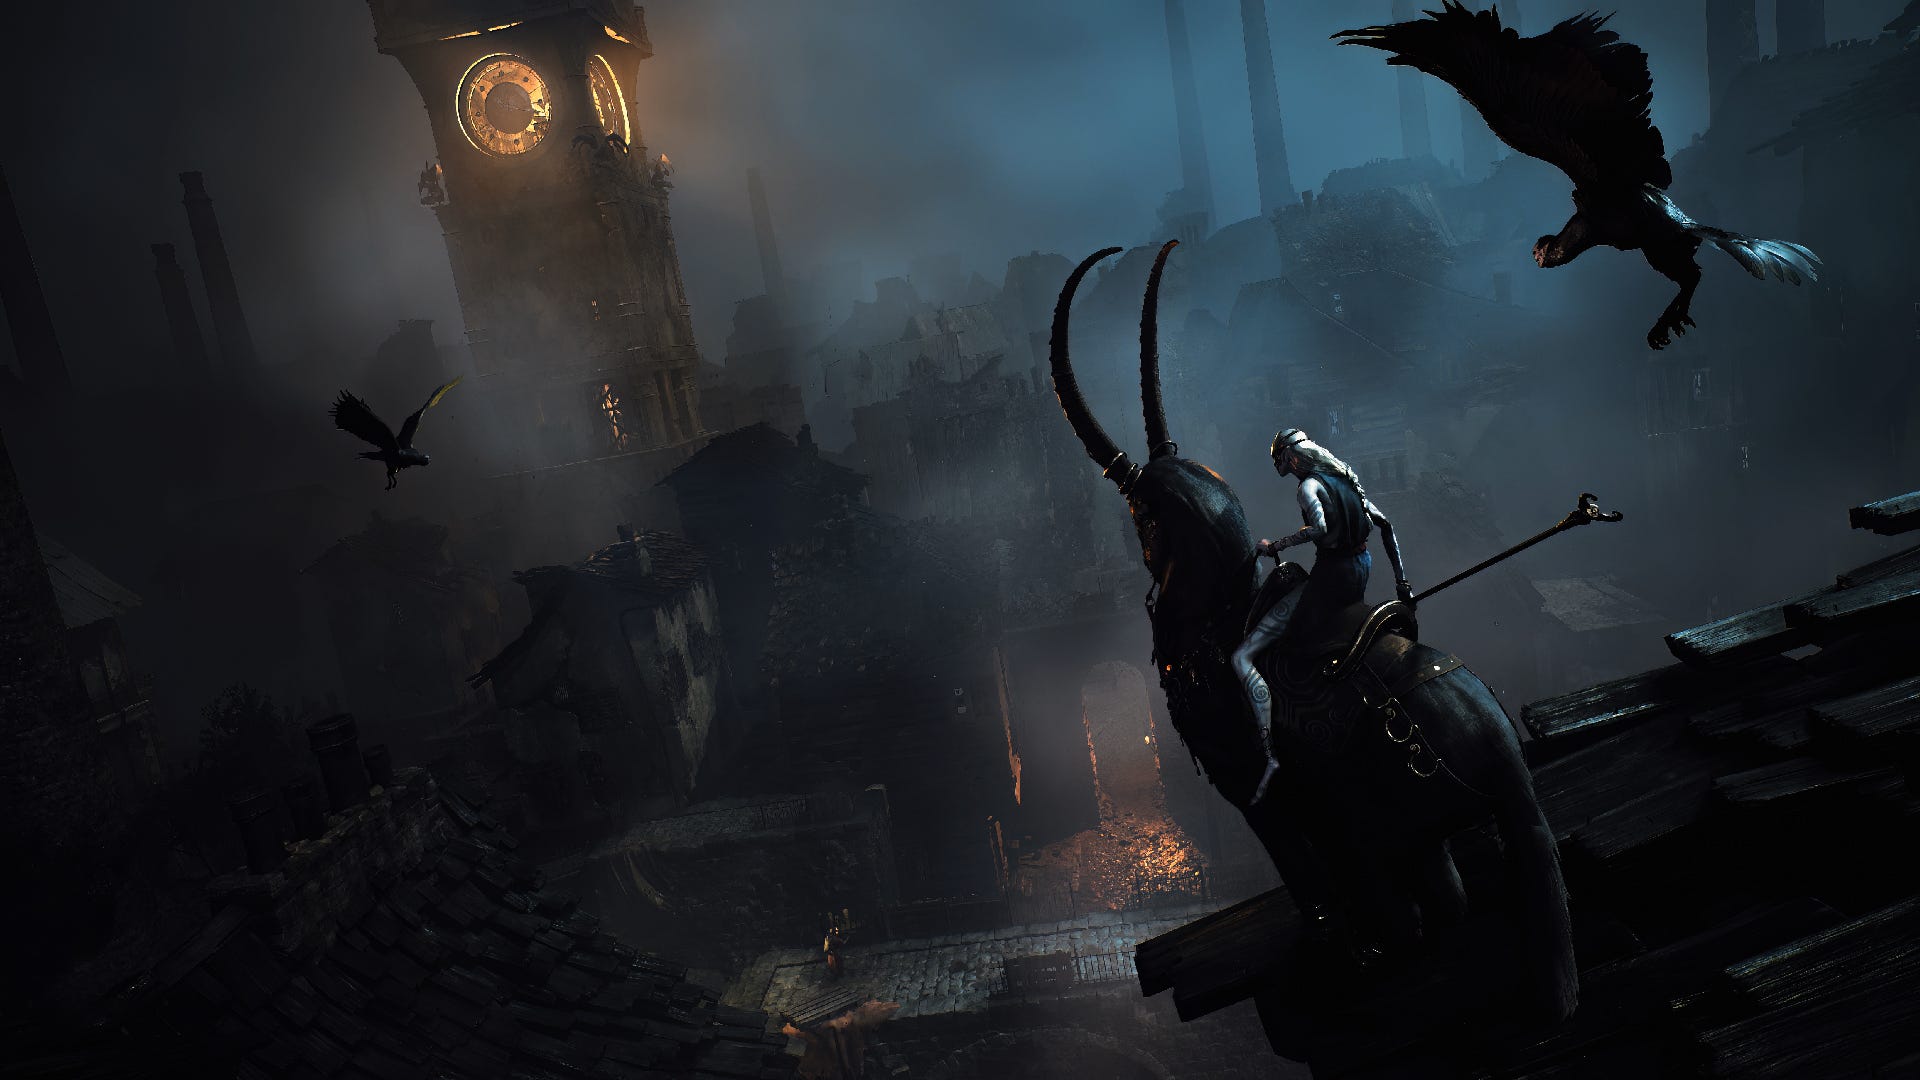 A screenshot from Remnant II. A long-limbed creature rides a flying monster with a clock tower looming in the background.